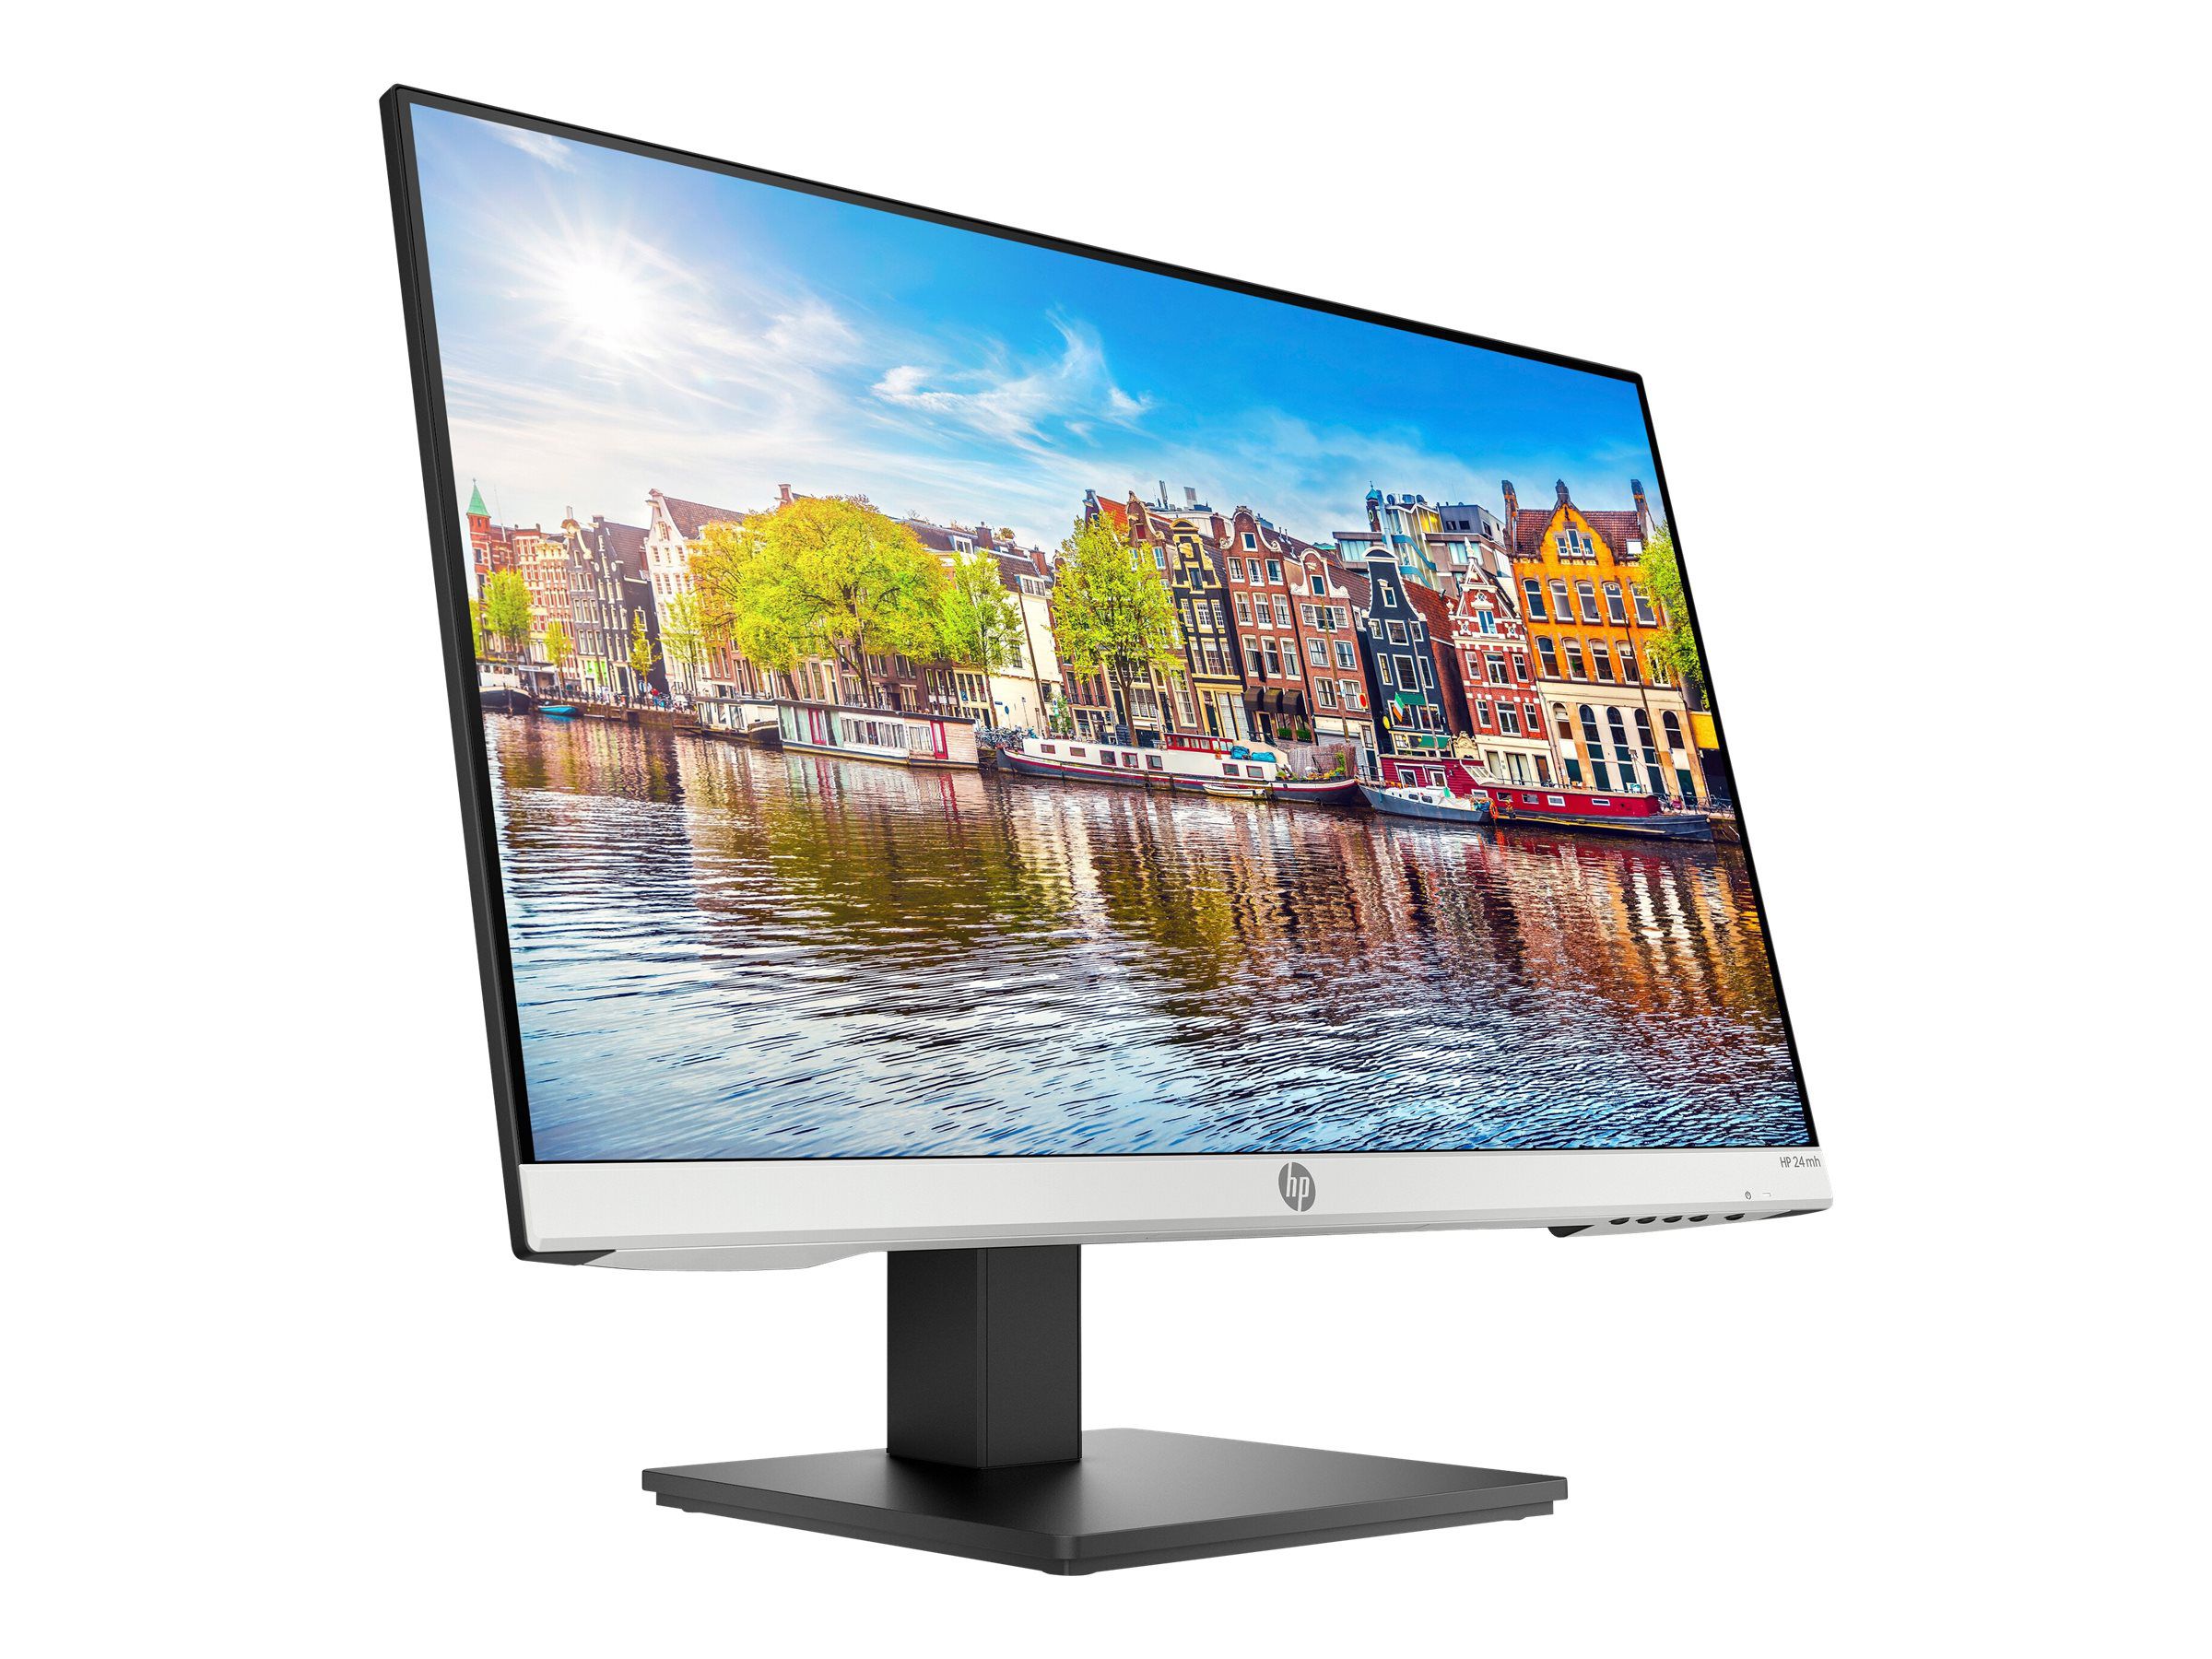 The HP 24mh is a decent entry-level 24-inch 1080p monitor for $175. 